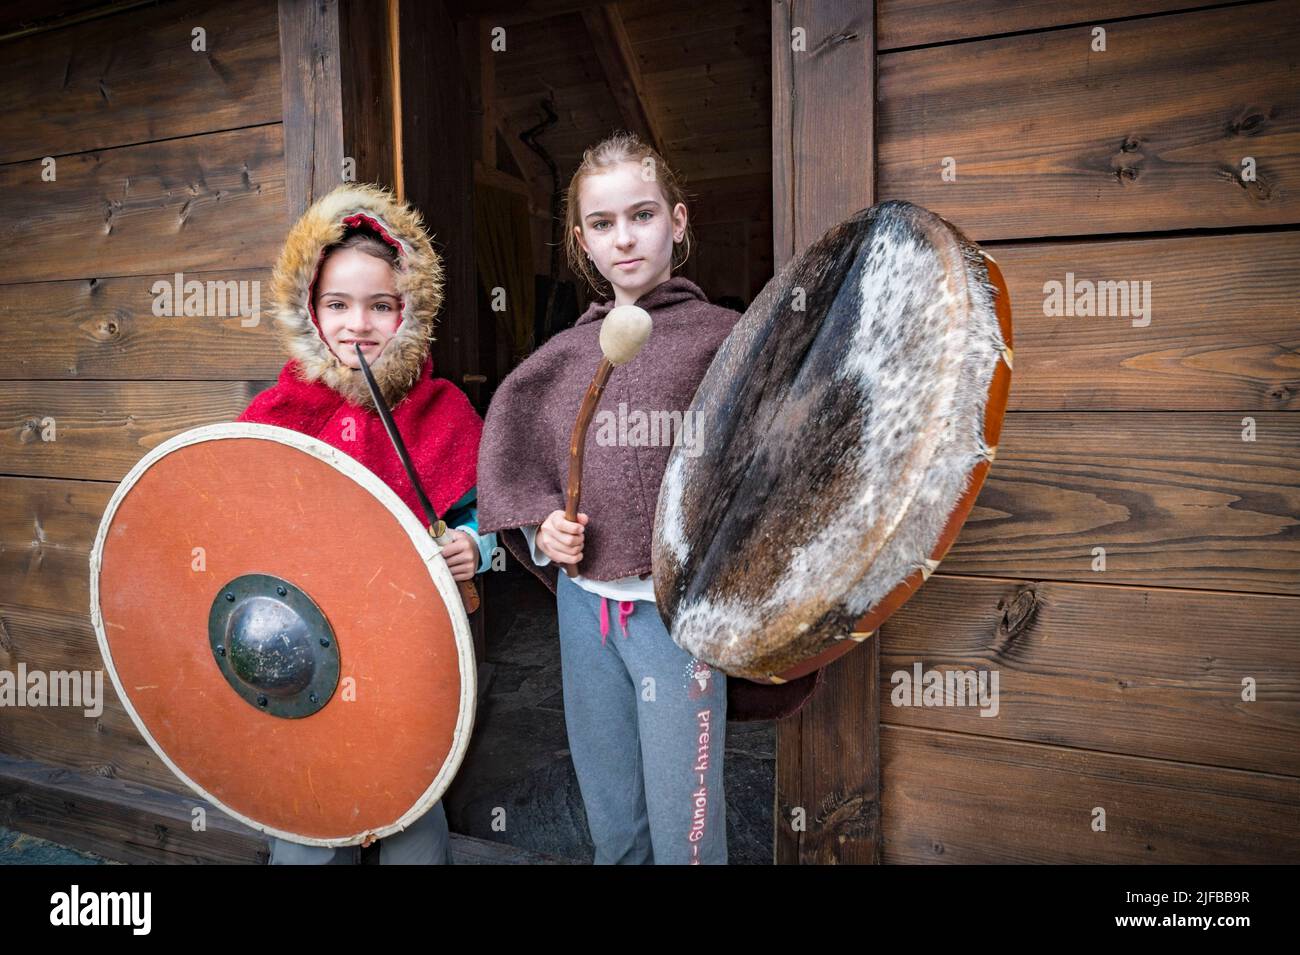 Norway, County of Vestland, Naeroyfjord, Aurland, Gudvangen, Viking village, children dressed and adorned as in Viking times, one as a huntress, the other as a shaman Stock Photo